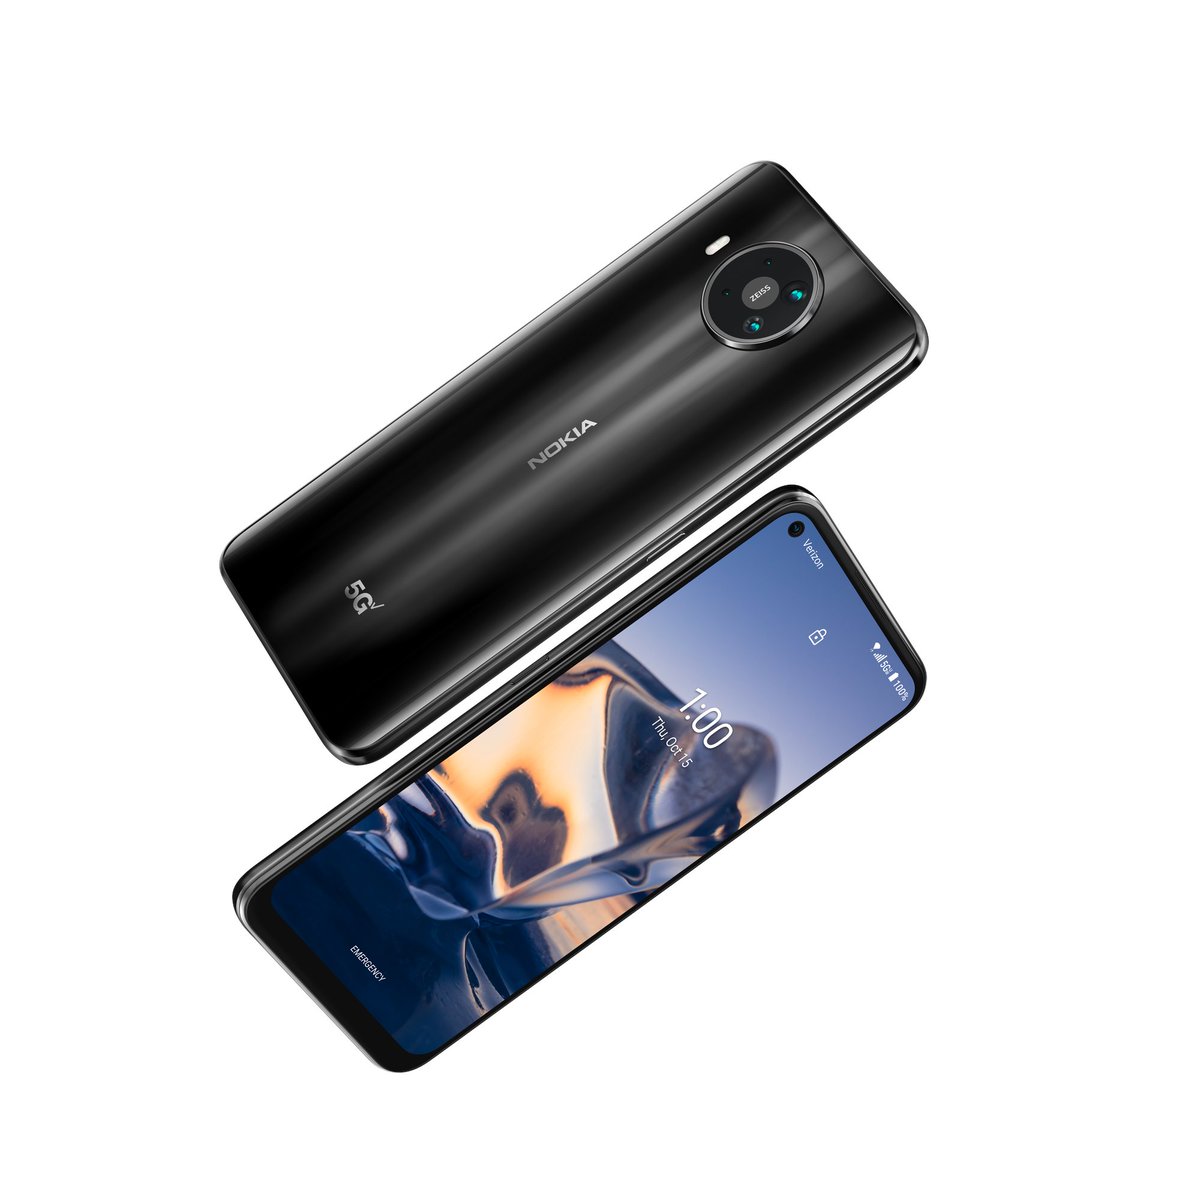 The Nokia 8 V 5G UW is HMD’s first high-end phone sold by Verizon